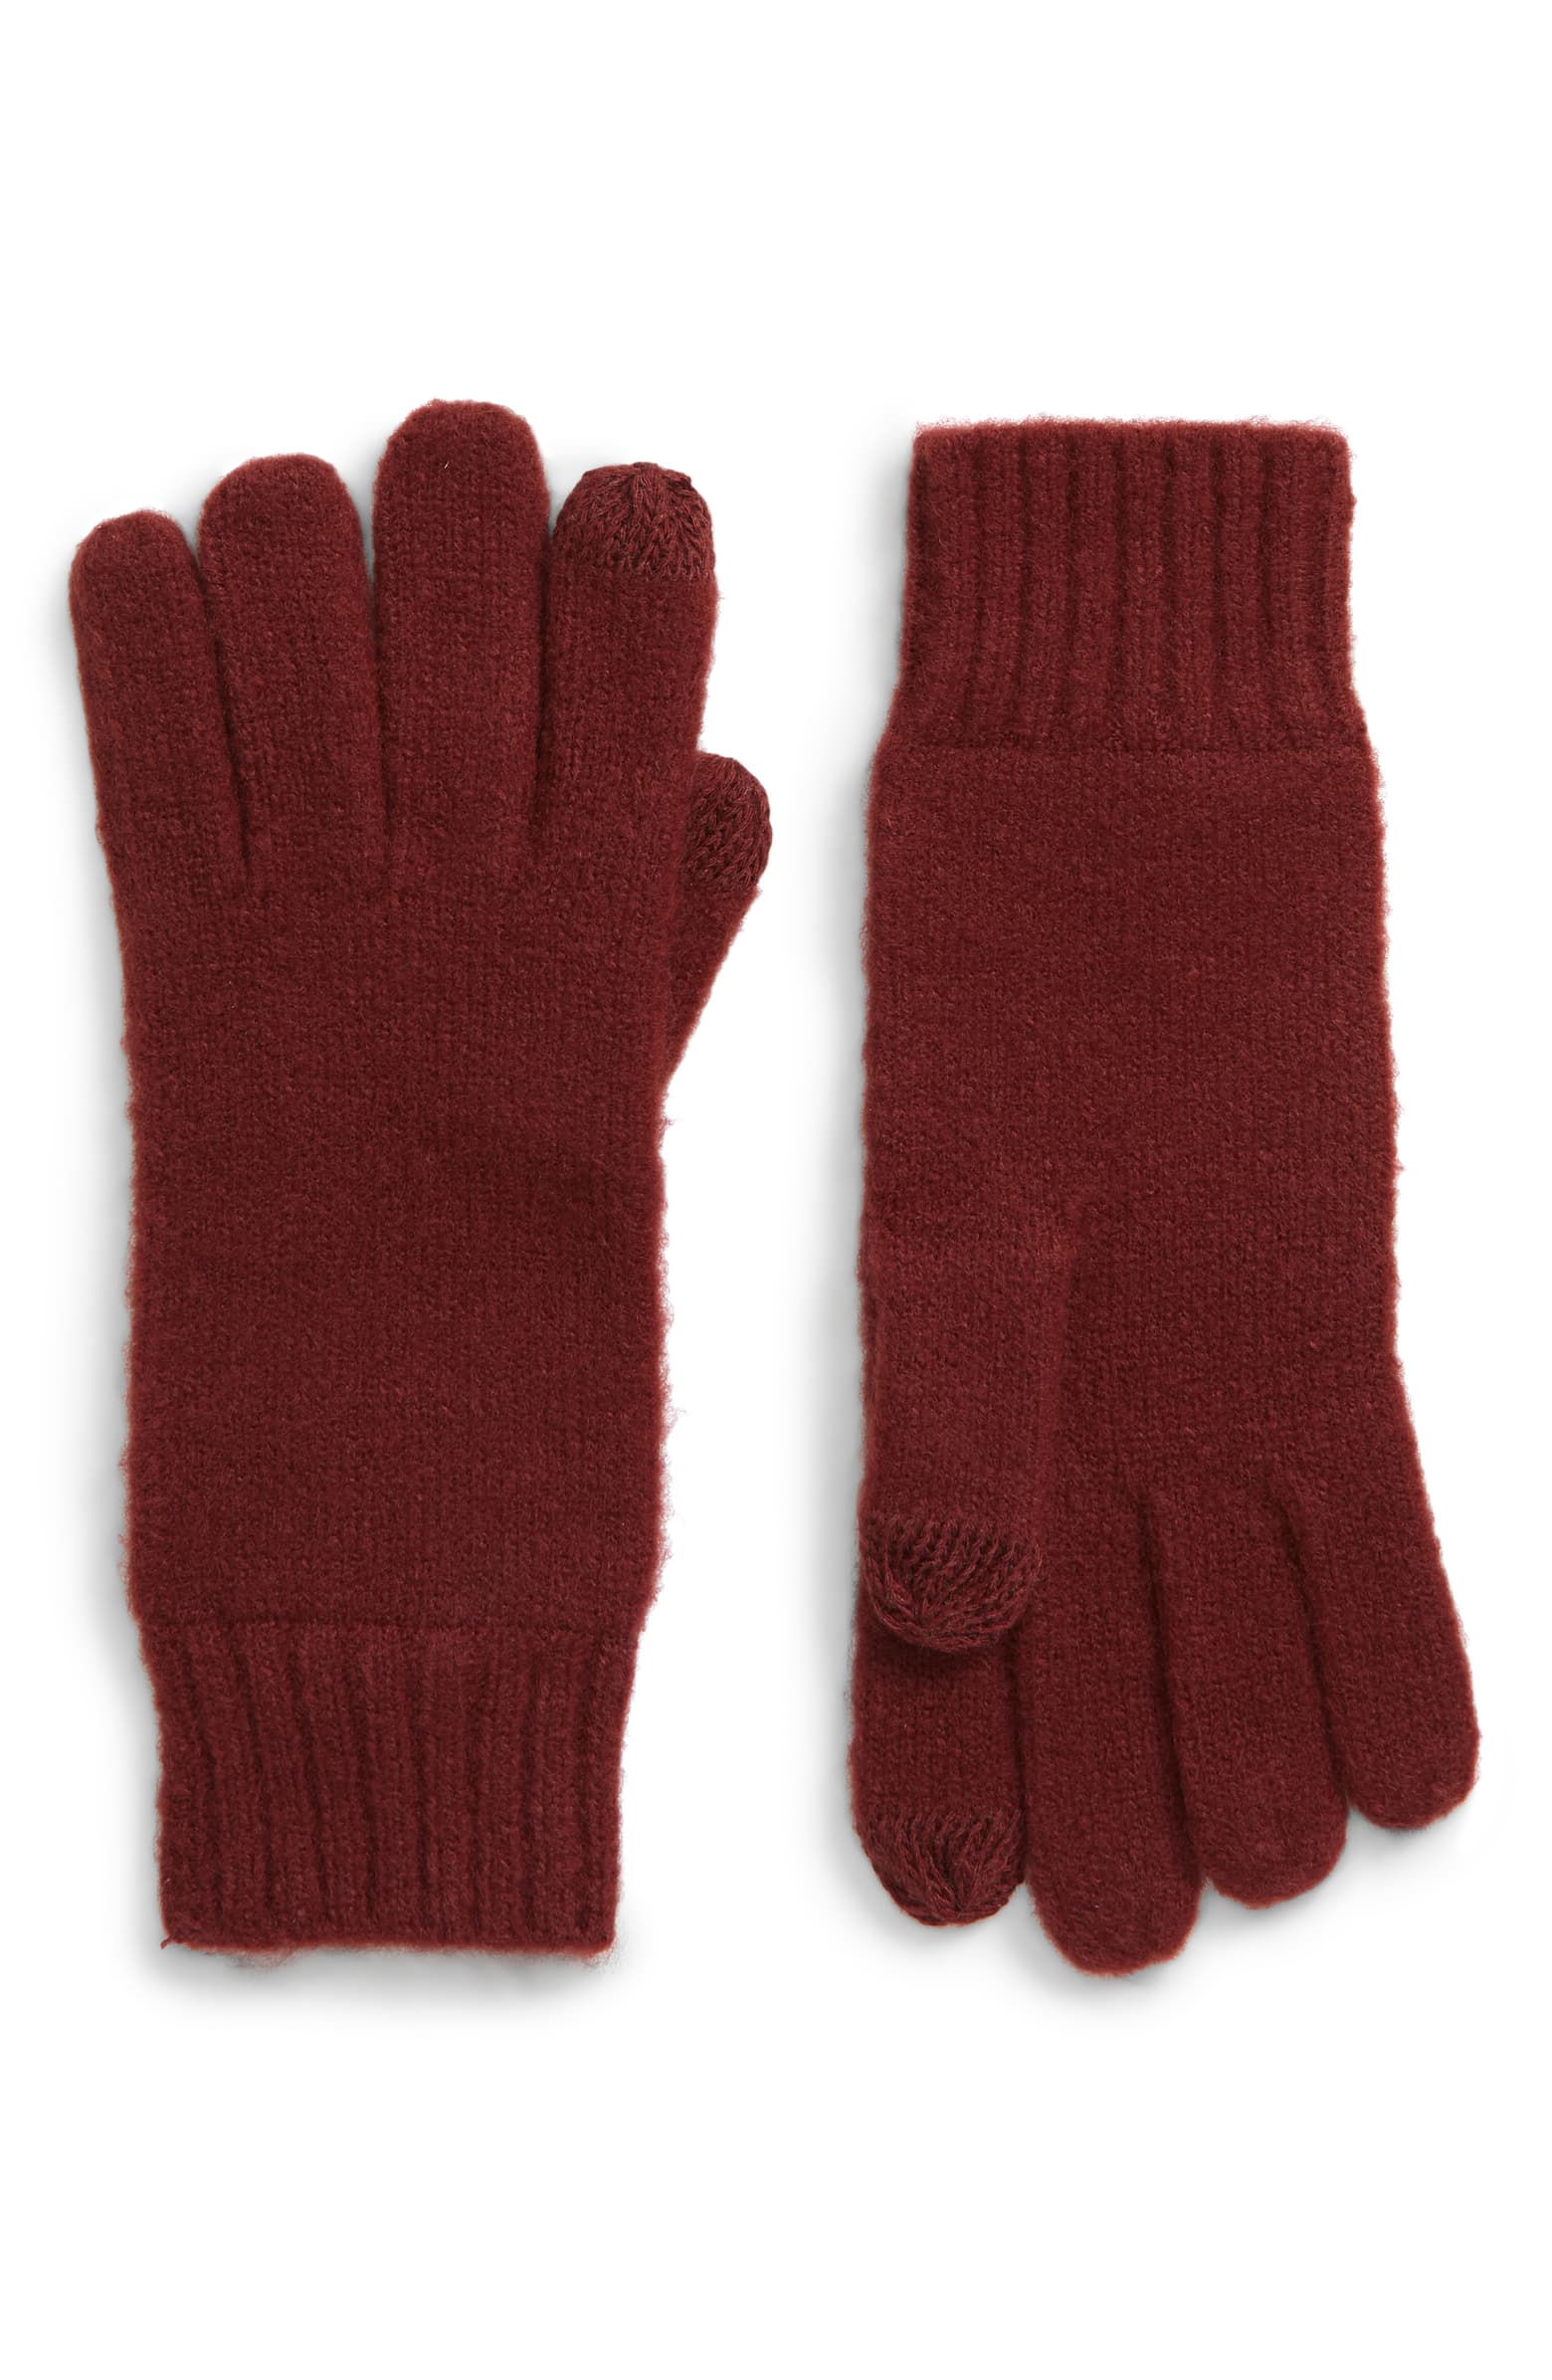 Touch screen gloves for iPhone